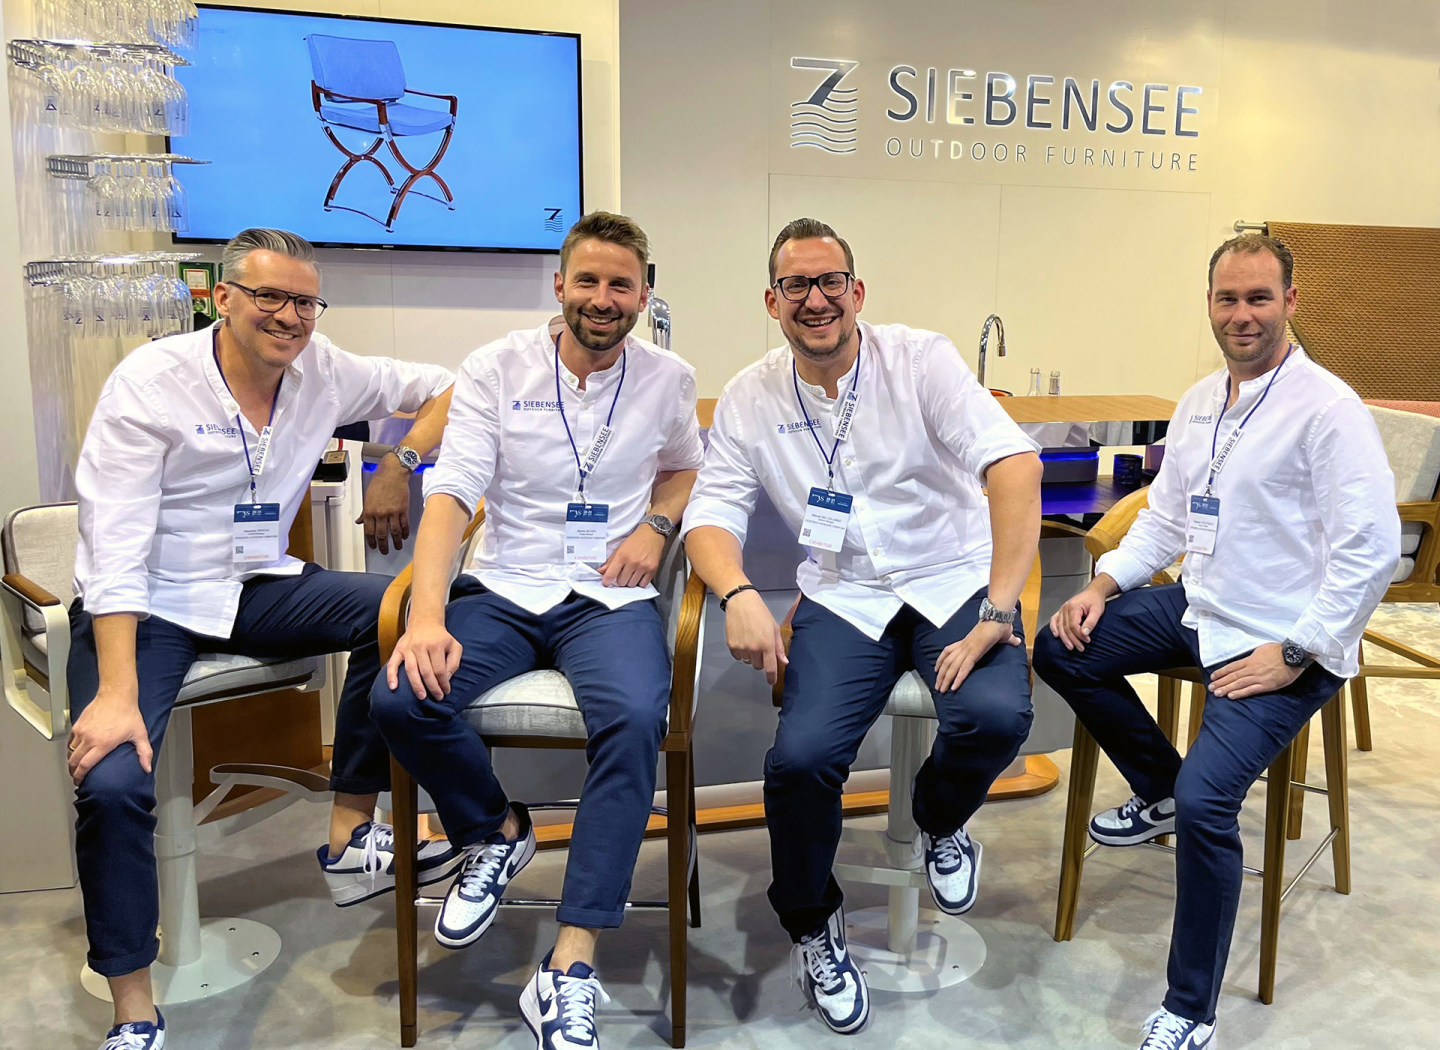 The Siebensee Team at the Monaco Yacht Show